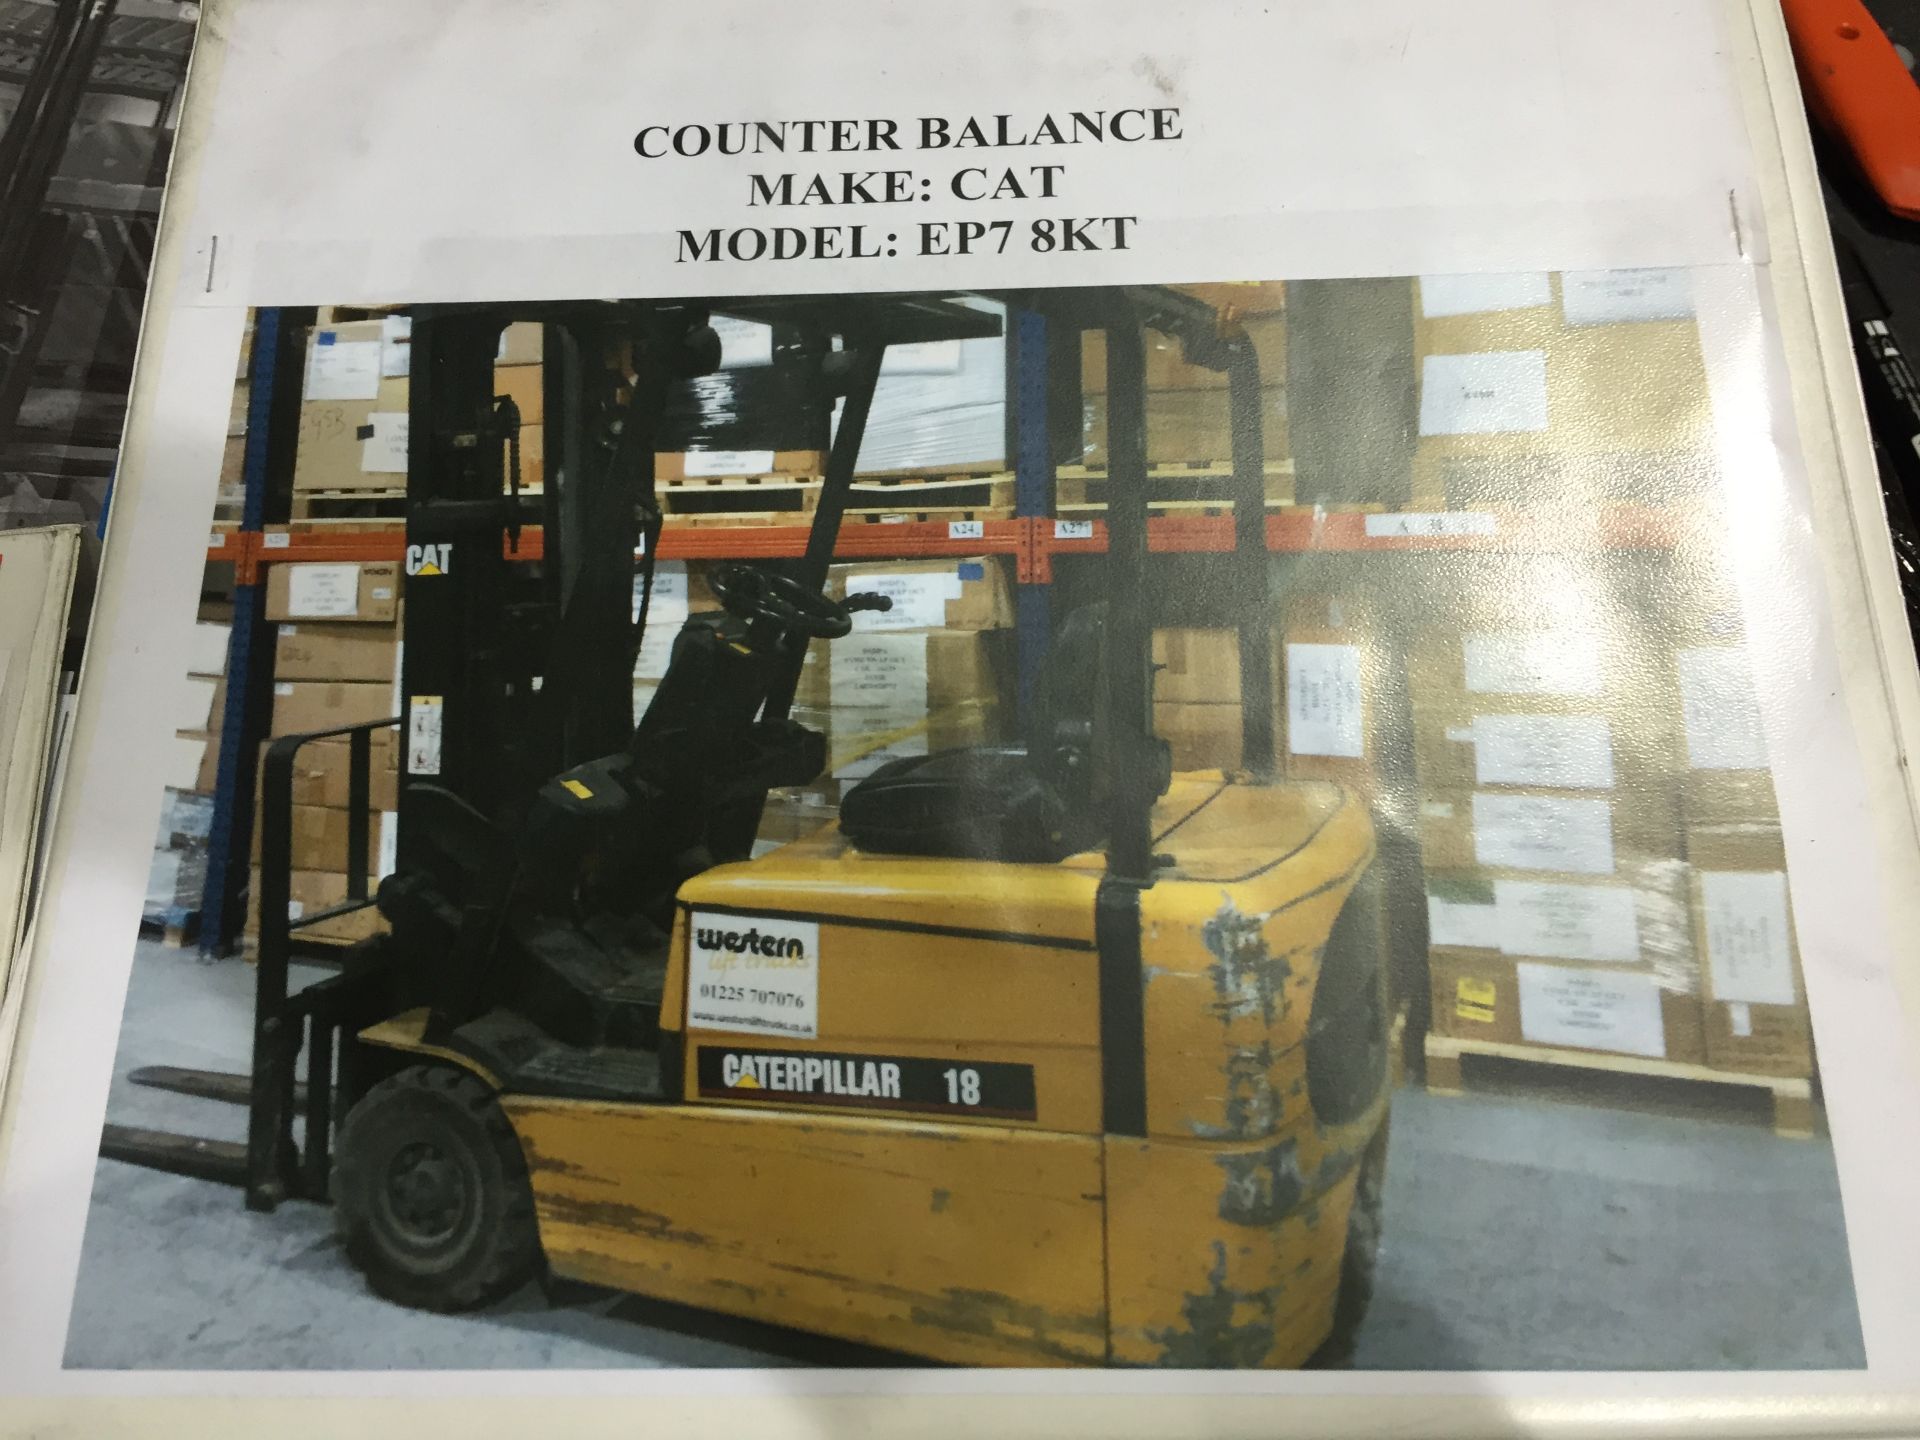 1 x Caterpillar Electric Counter Balance Forklift Truck - Model EP18KT - 1800kg Basic Capacity - - Image 14 of 14